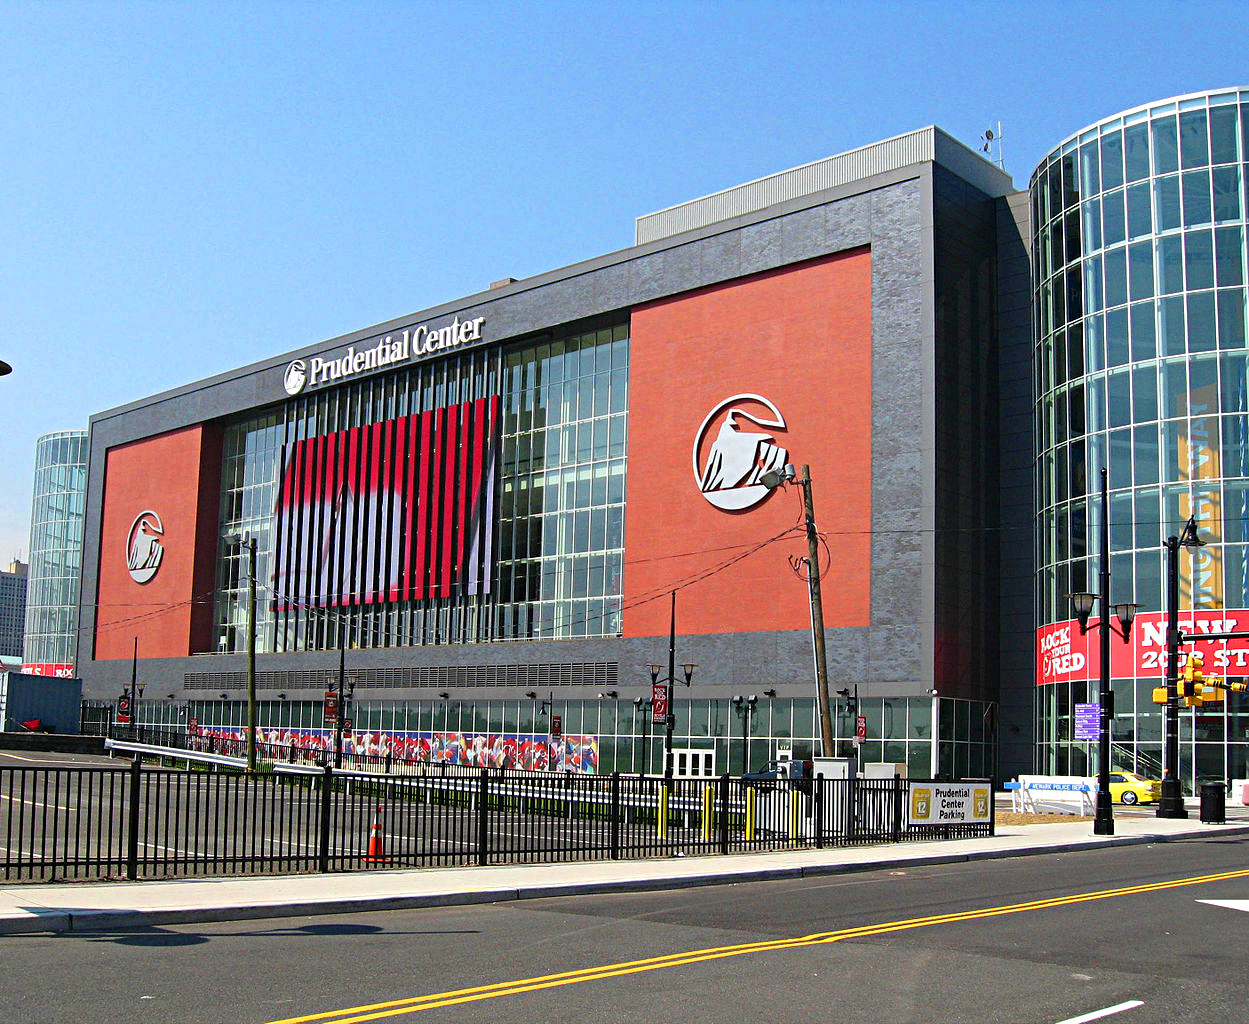 Reserve Parking at Newark's Prudential Center